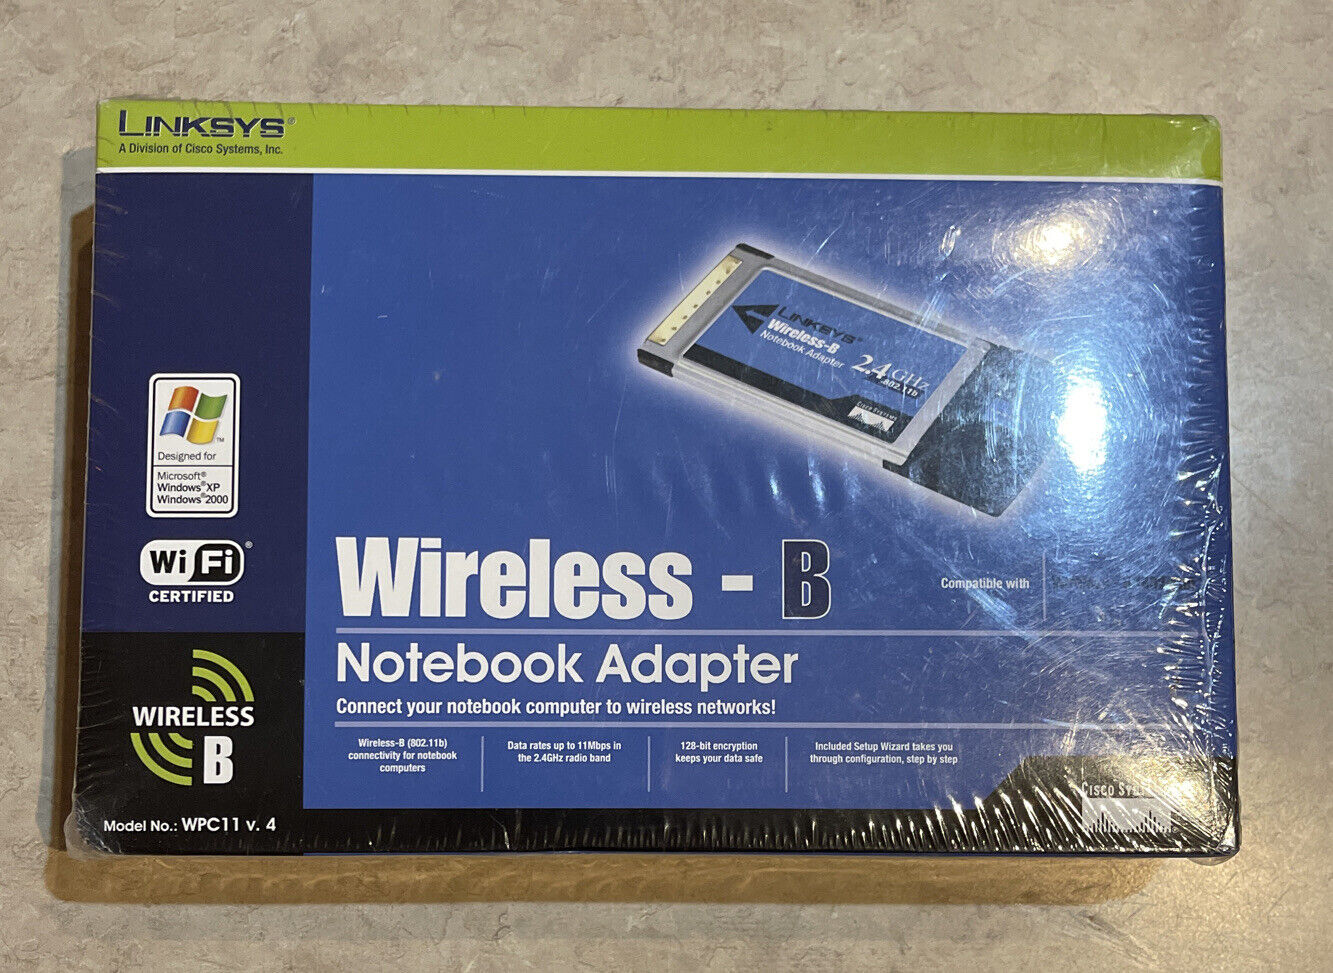 Linksys Wireless B Notebook Adapter WPC11 v.4 802.11b 11Mbps 2.4GHz New Sealed